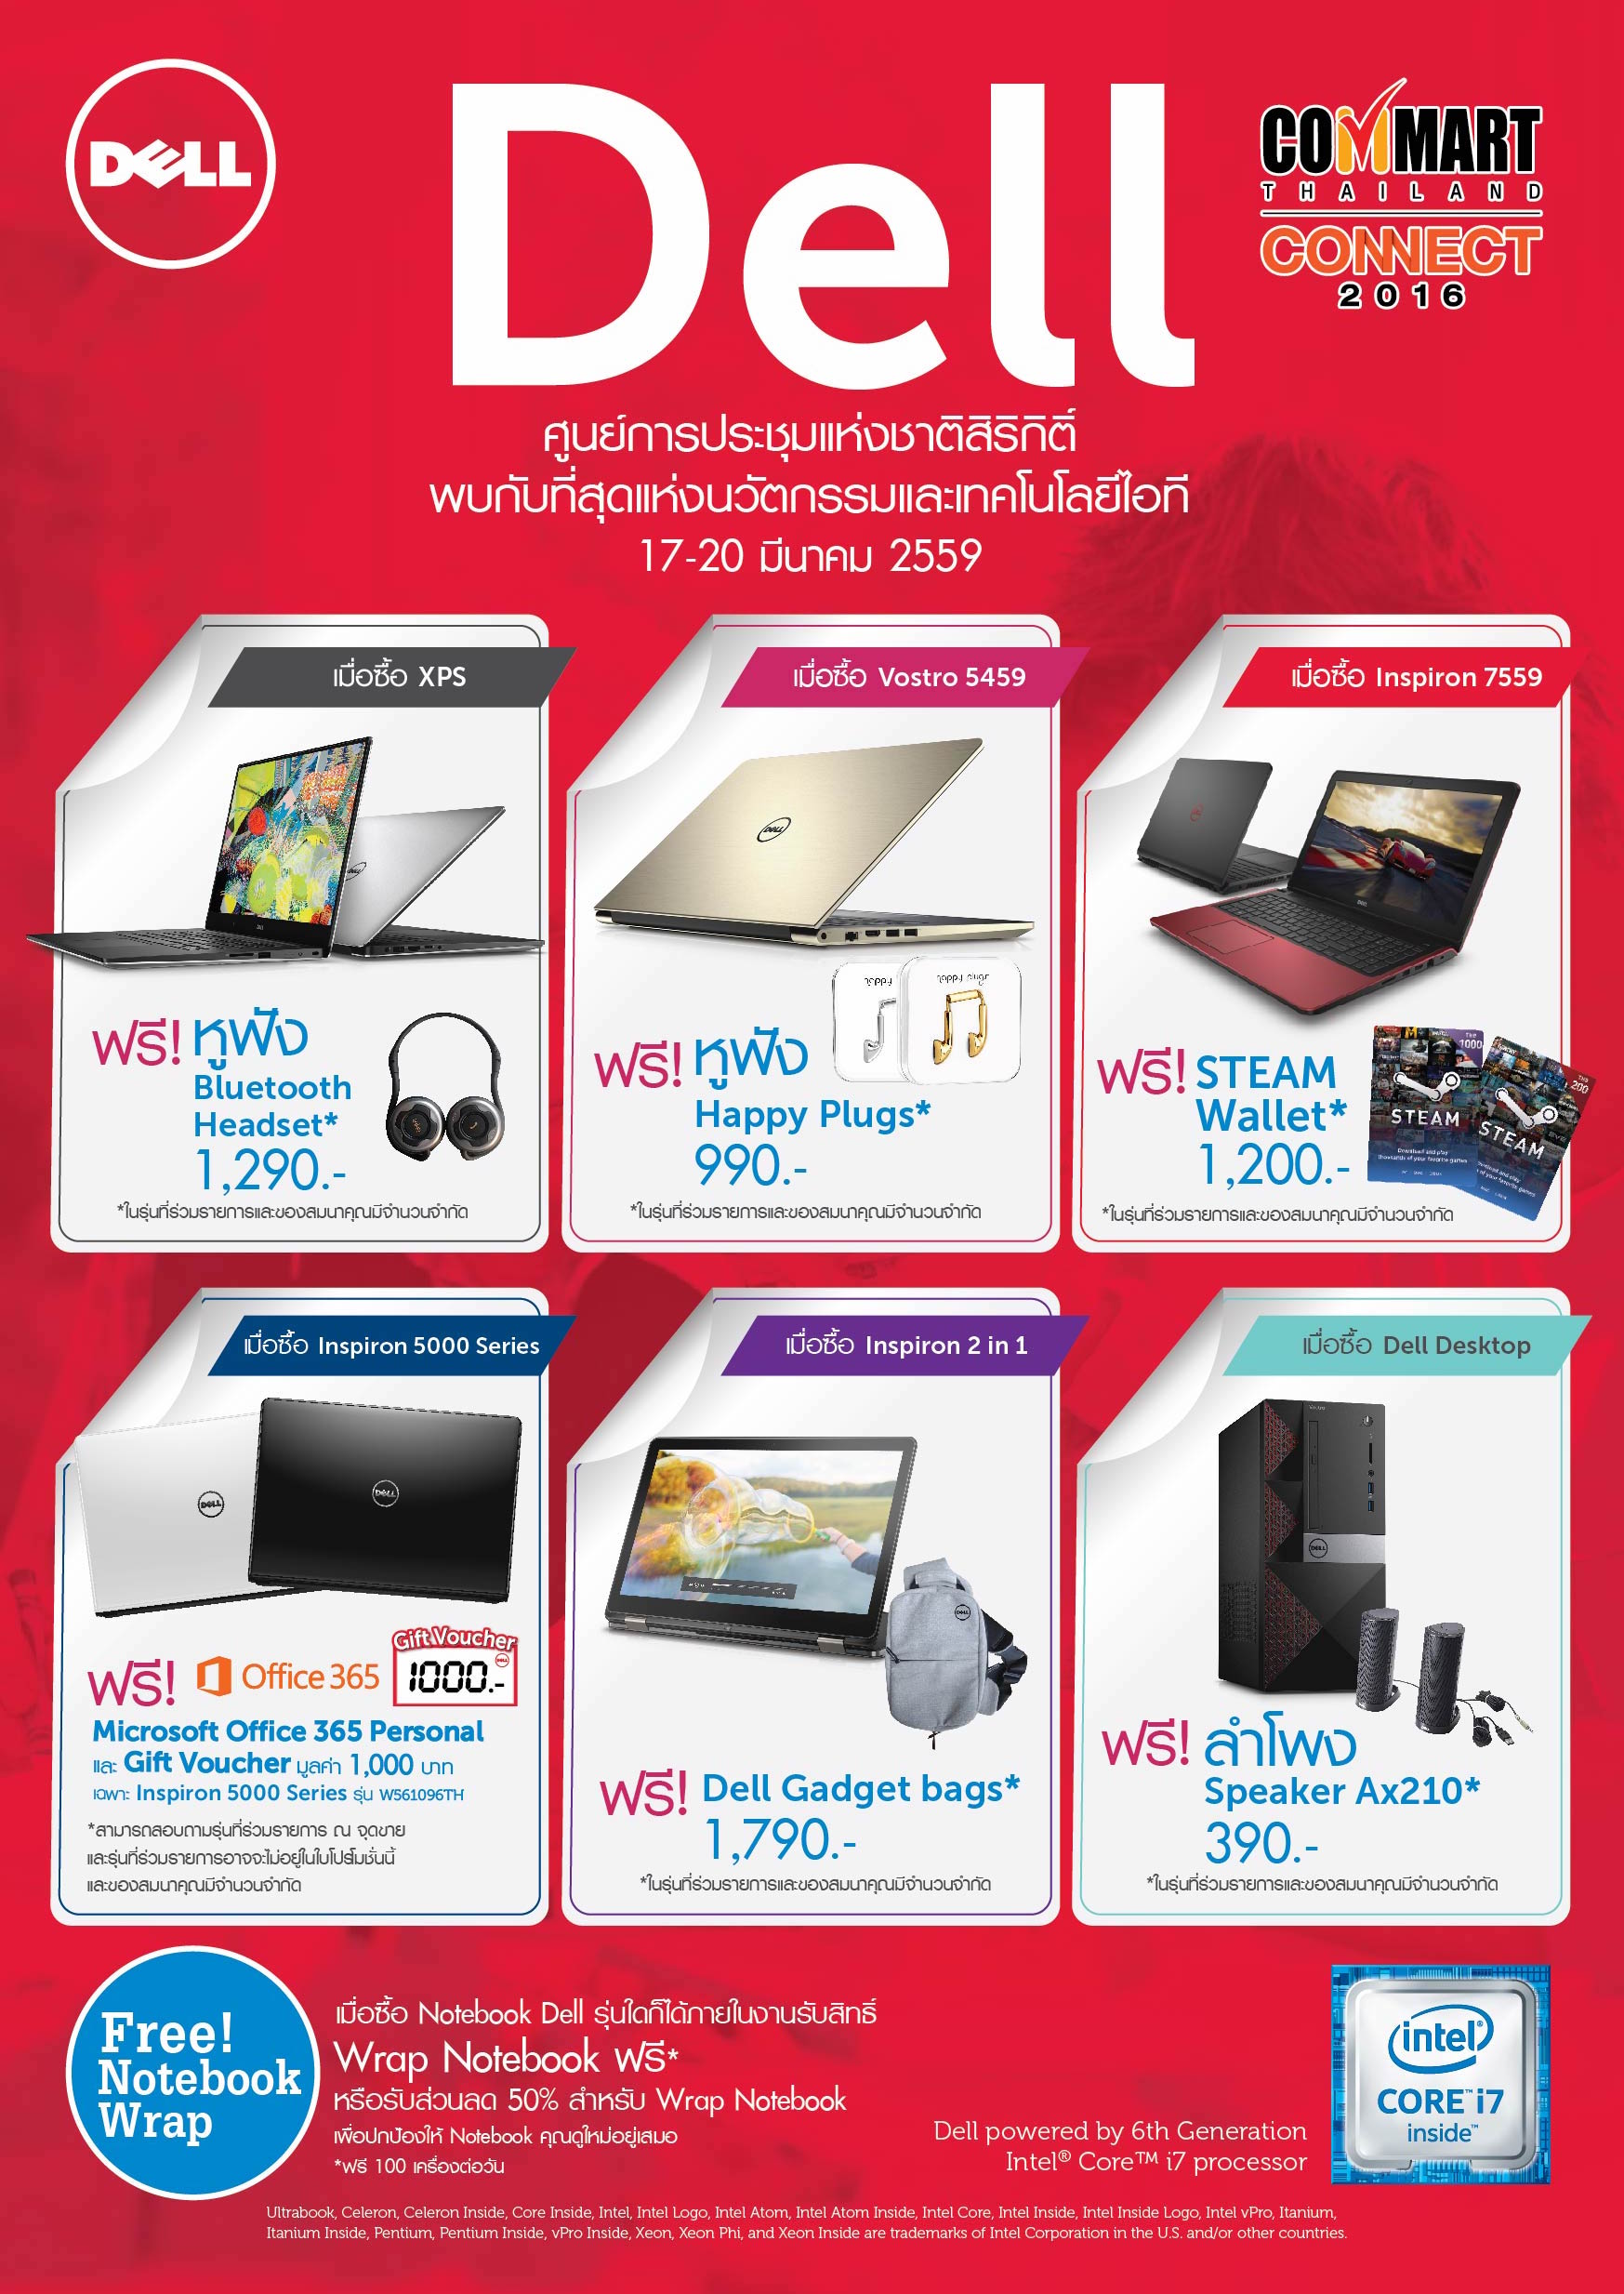 Dell Commart MAR2016 out A3 6